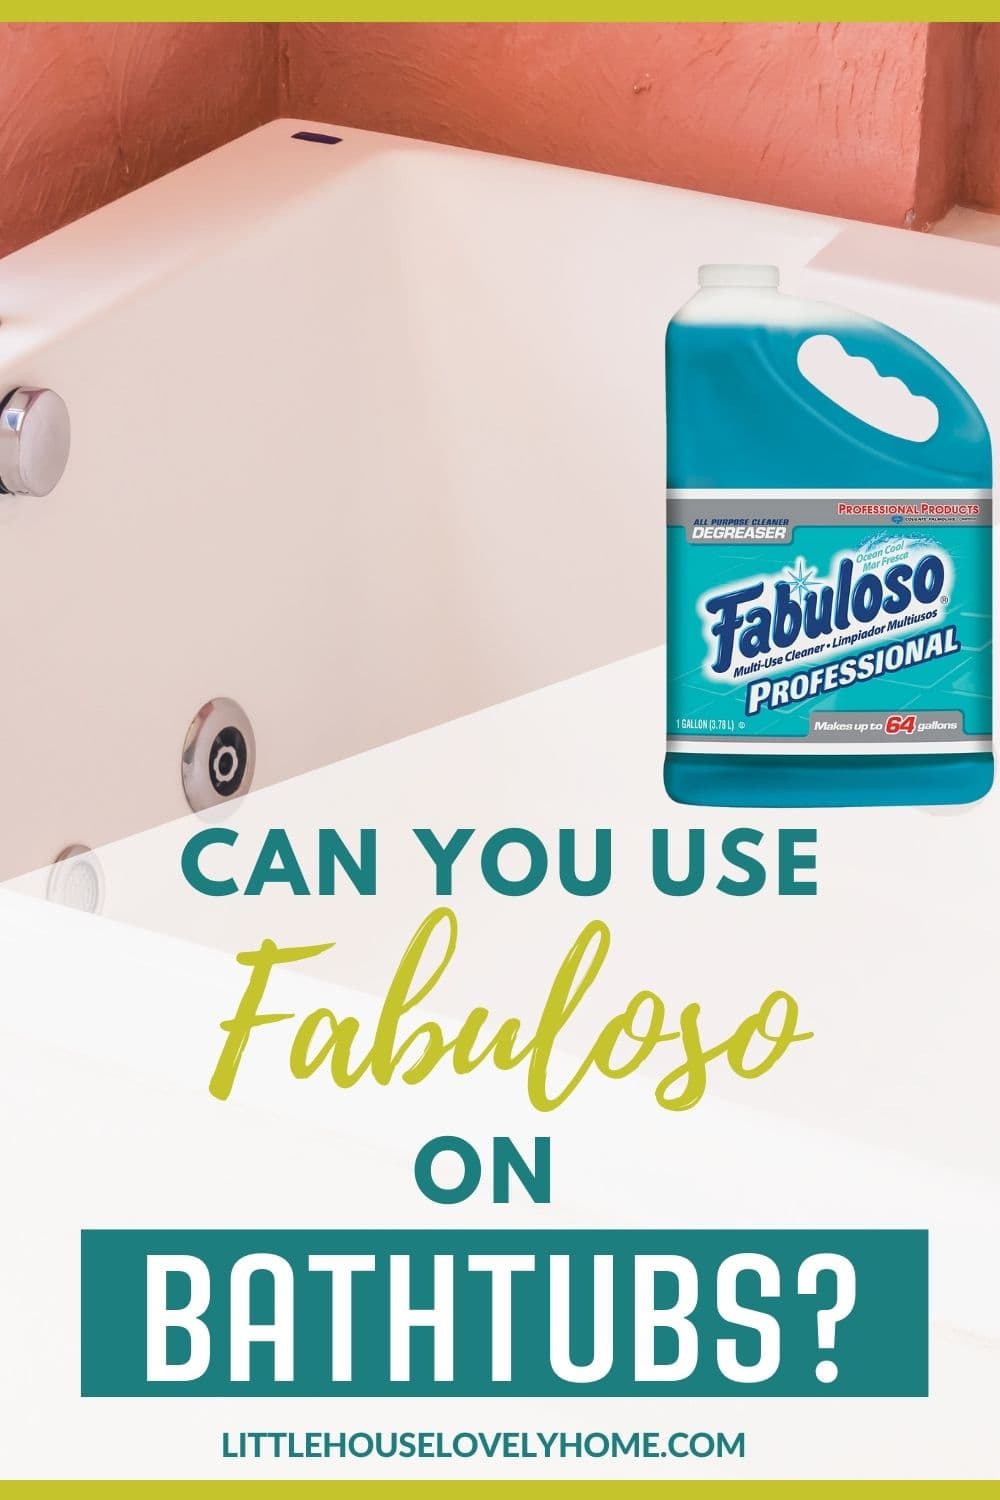 Image showing abathtub, an overlay of a blue gallon, and a text overlay that reads Can you use Fabuloso on bathtub